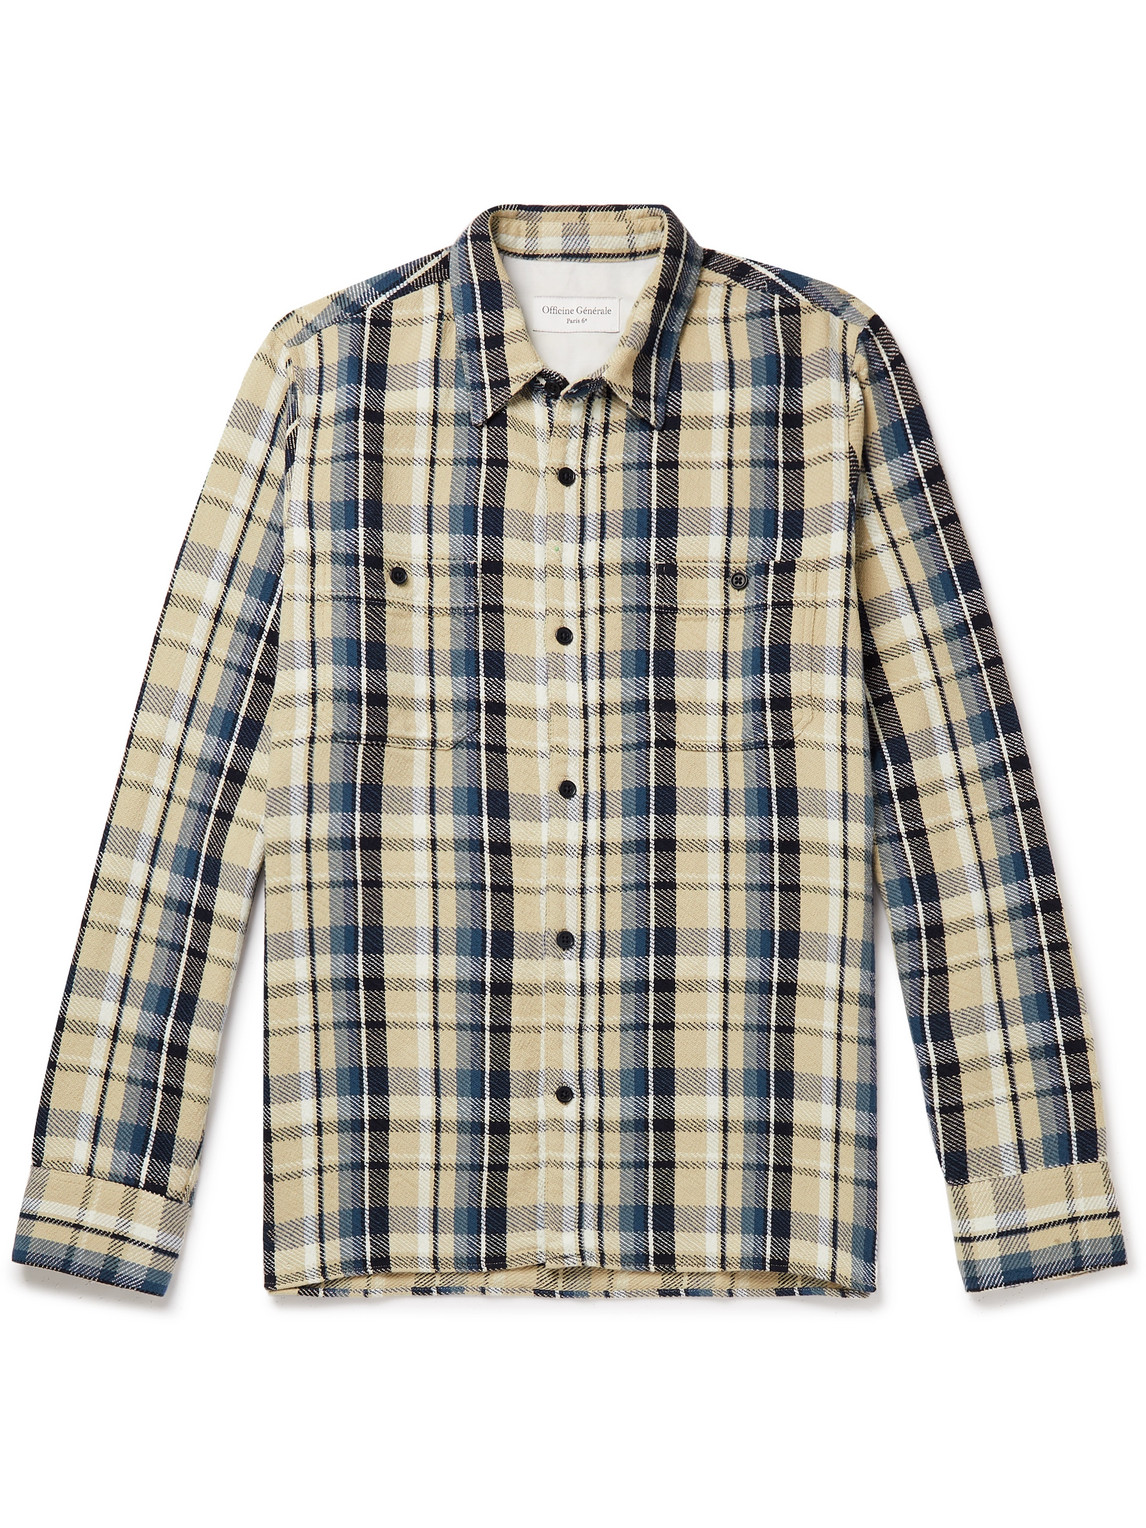 OFFICINE GENERALE GARMENT-DYED CHECKED COTTON SHIRT